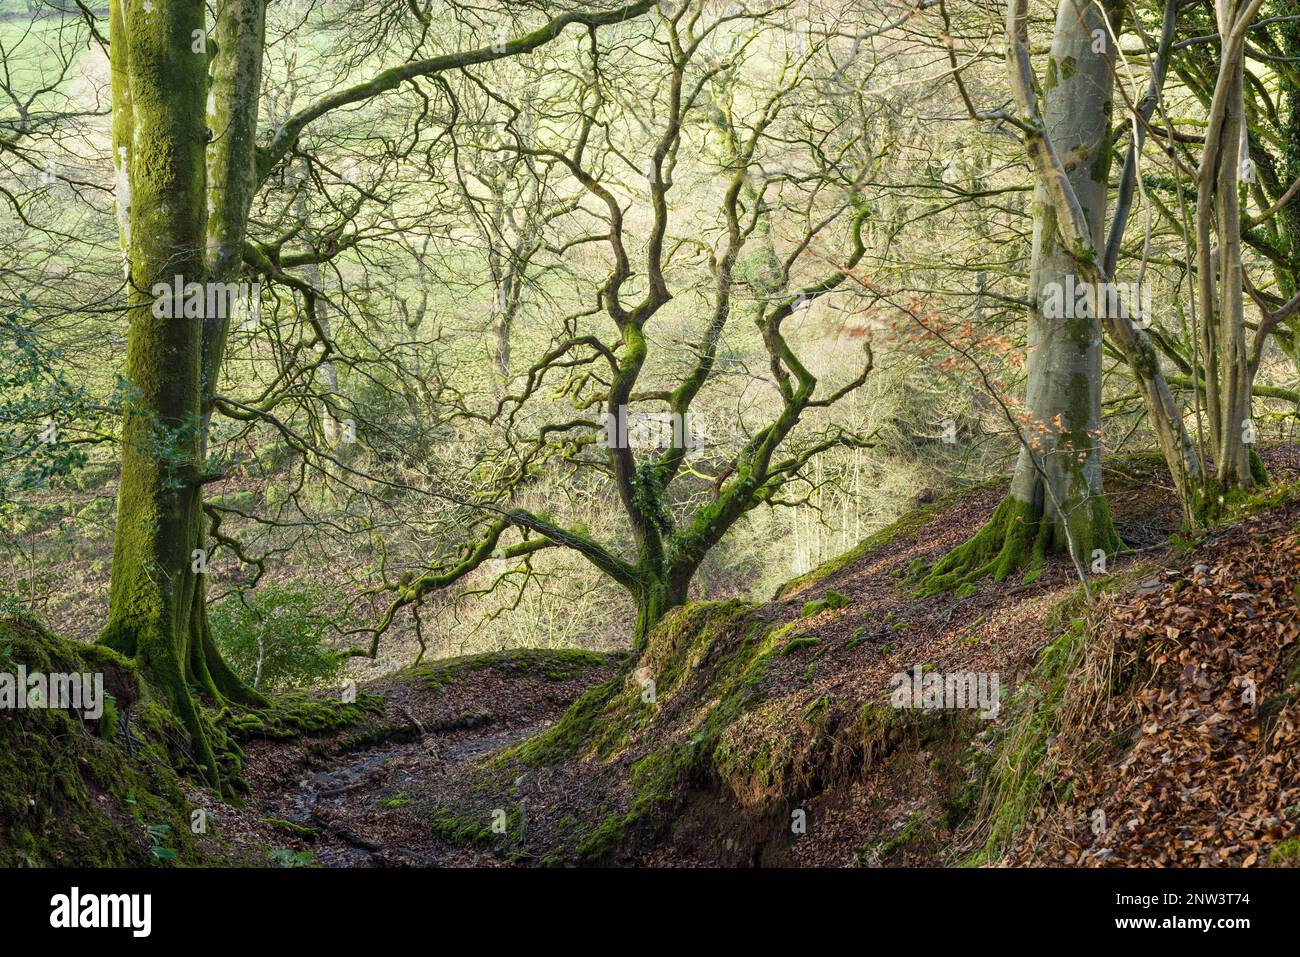 A broadleaf woodland in winter in the Barle valley near Dulverton in the Exmoor National Park, Somerset, England. Stock Photo